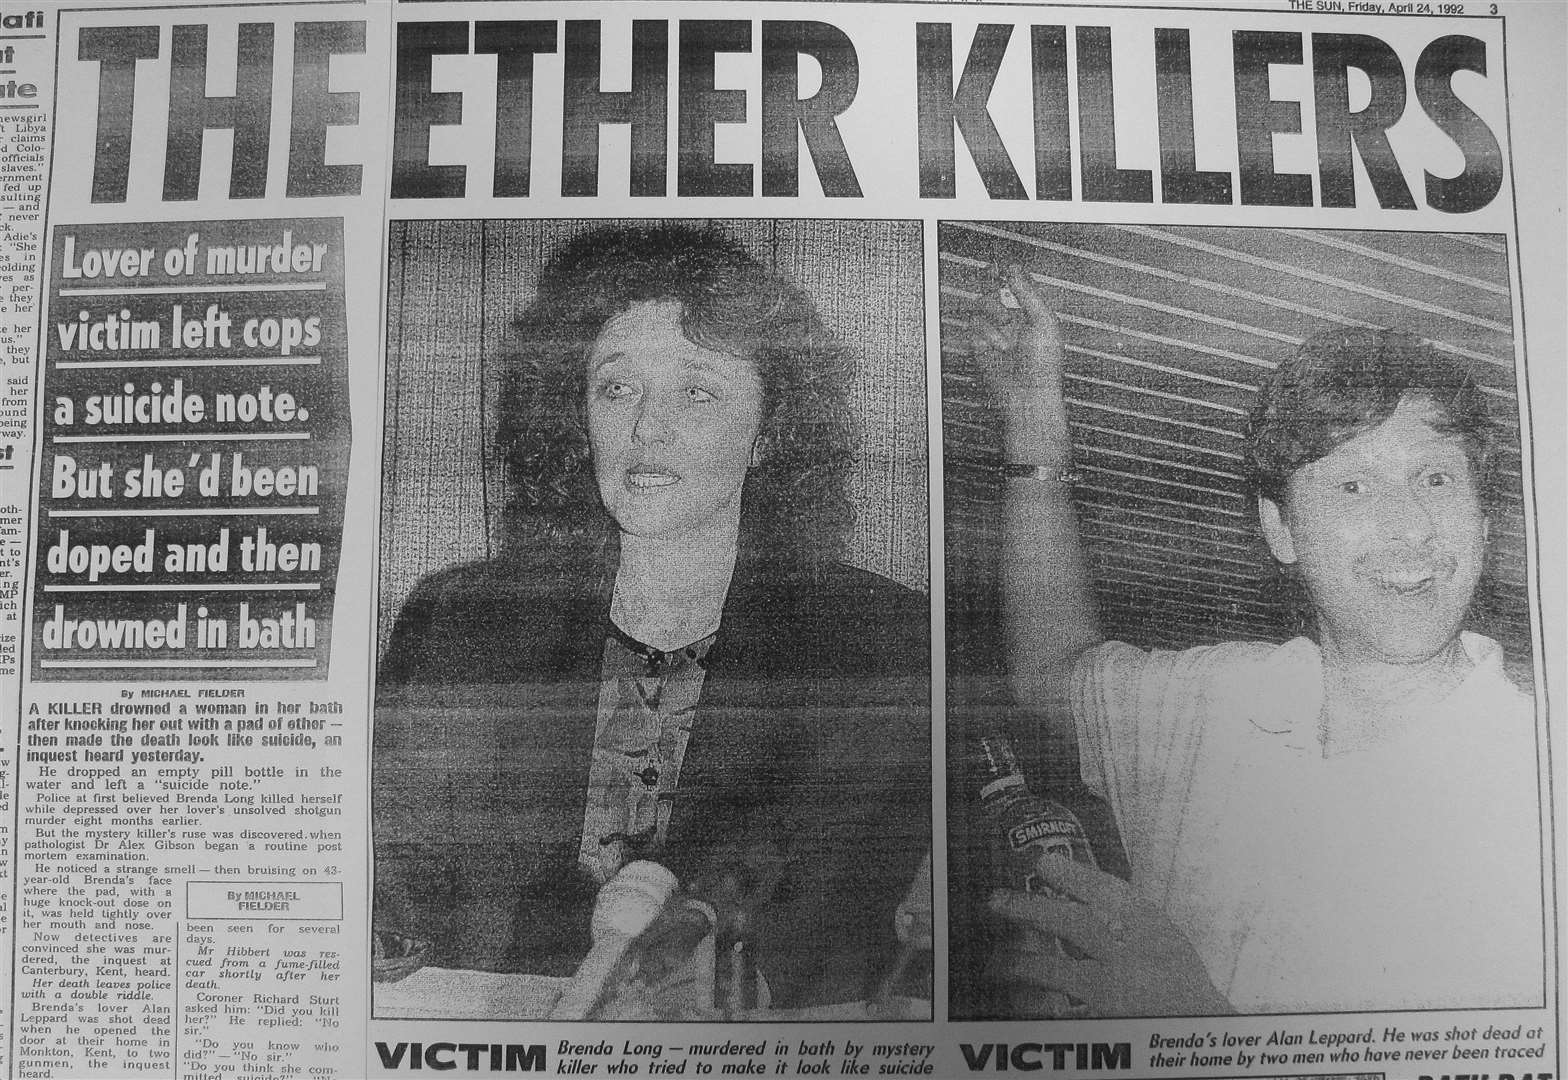 The Sun dubbed the Brenda Long’s murderers “The Ether Killers”